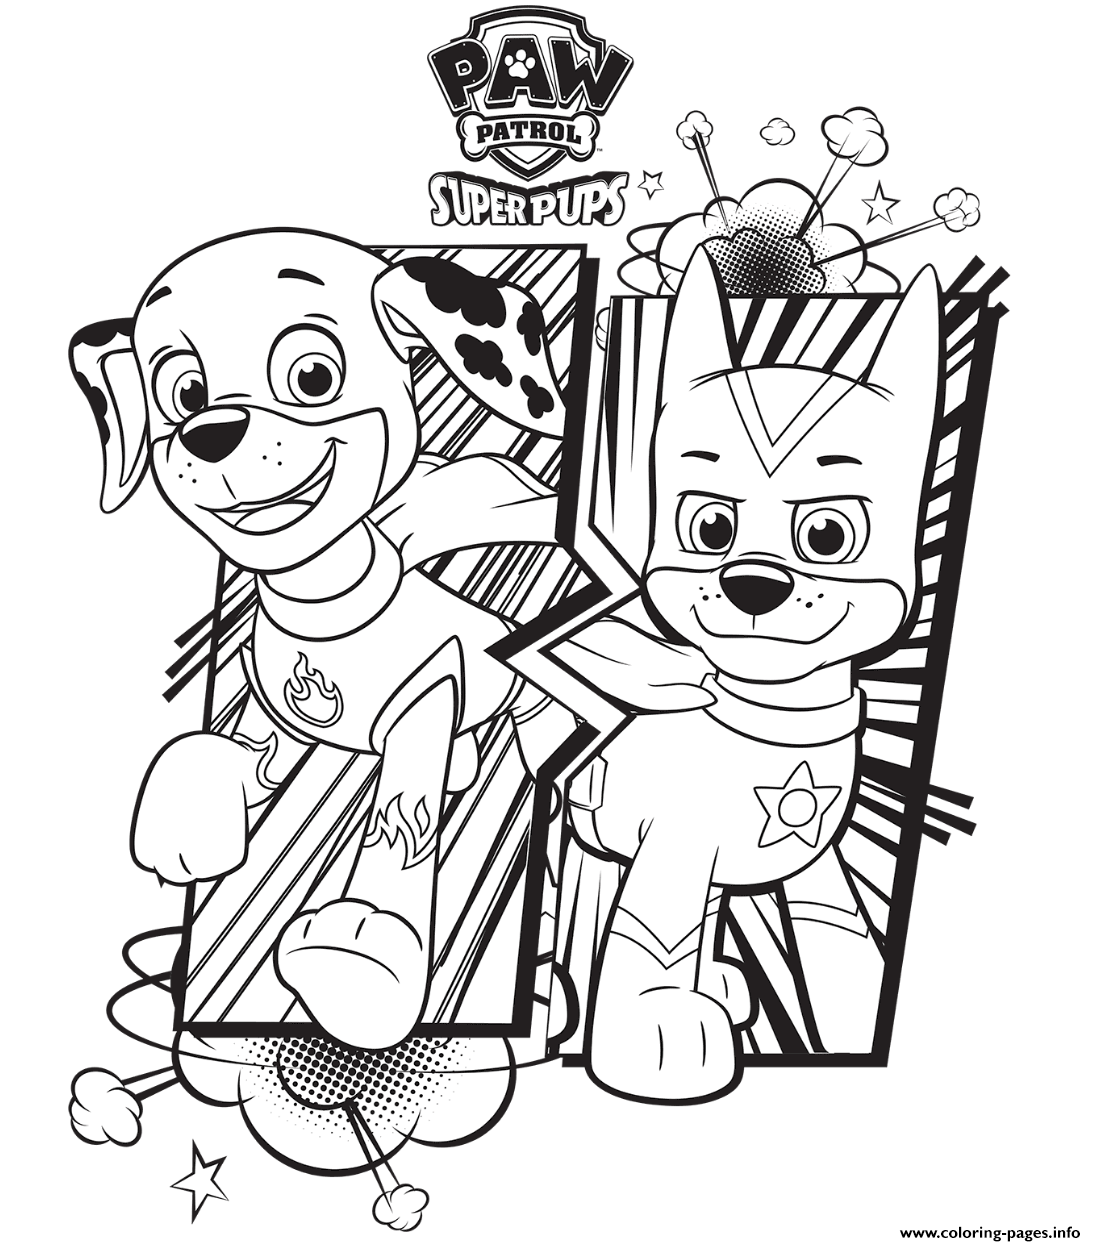 paw-patrol-badges-coloring-pages-at-getcolorings-free-printable-colorings-pages-to-print